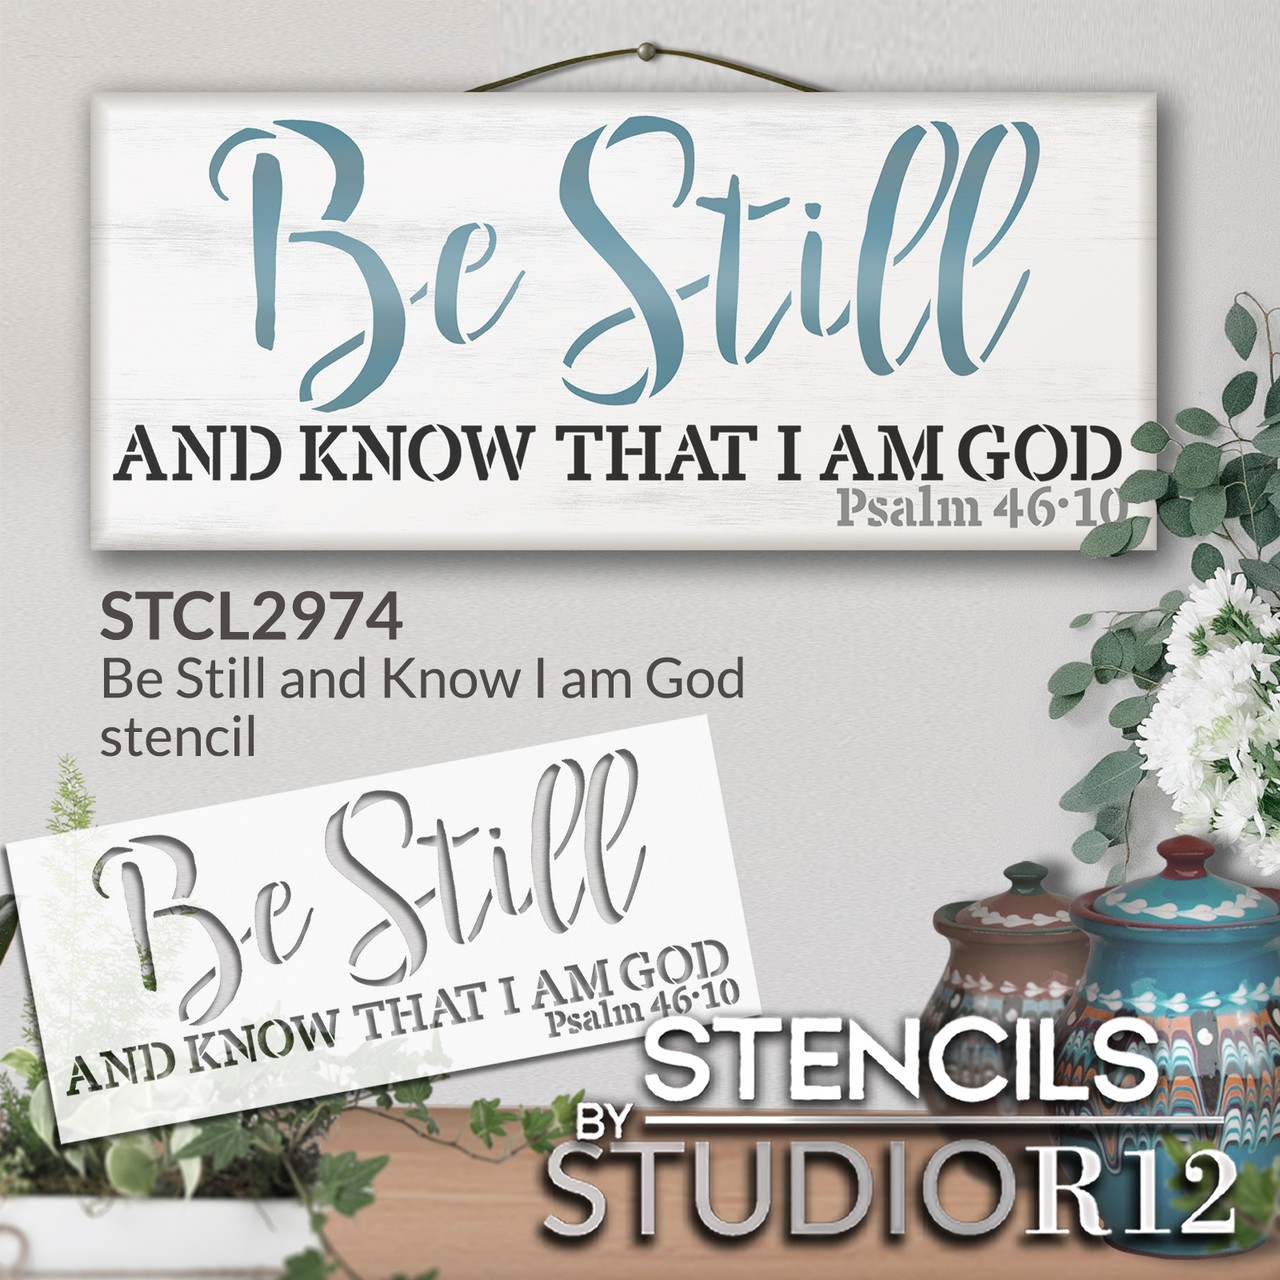 Be Still and Know I Am God Stencil by StudioR12, Christian Bible Verse  Psalm 46:10, Farmhouse Faith Decor, Paint Wood Signs, Reusable Mylar  Template, DIY Home Crafting